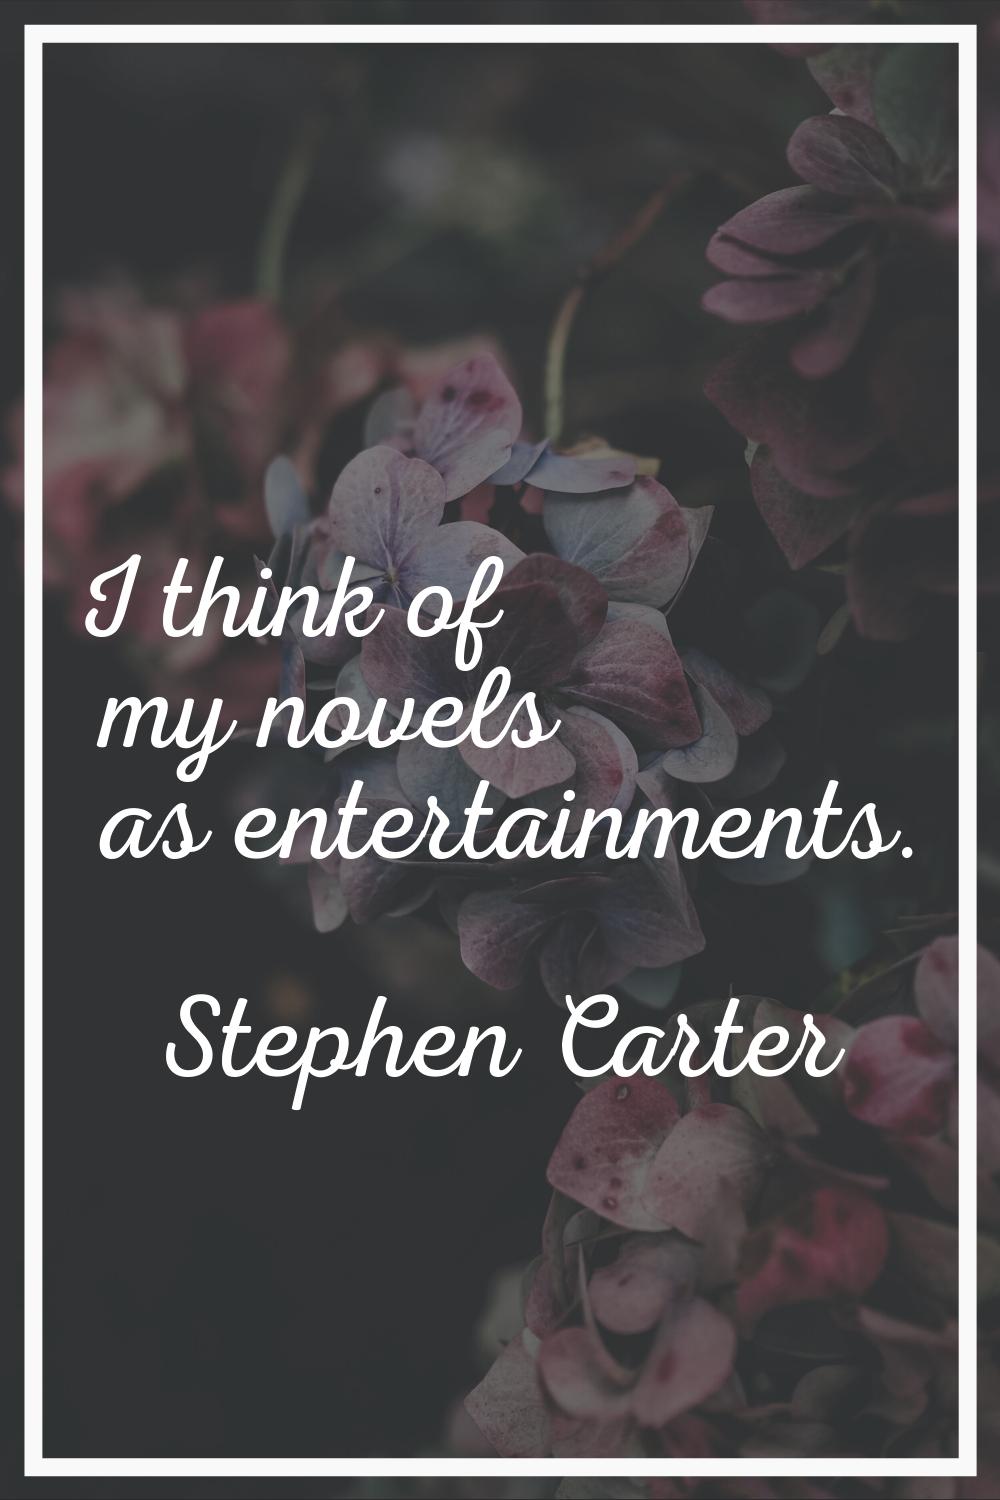 I think of my novels as entertainments.